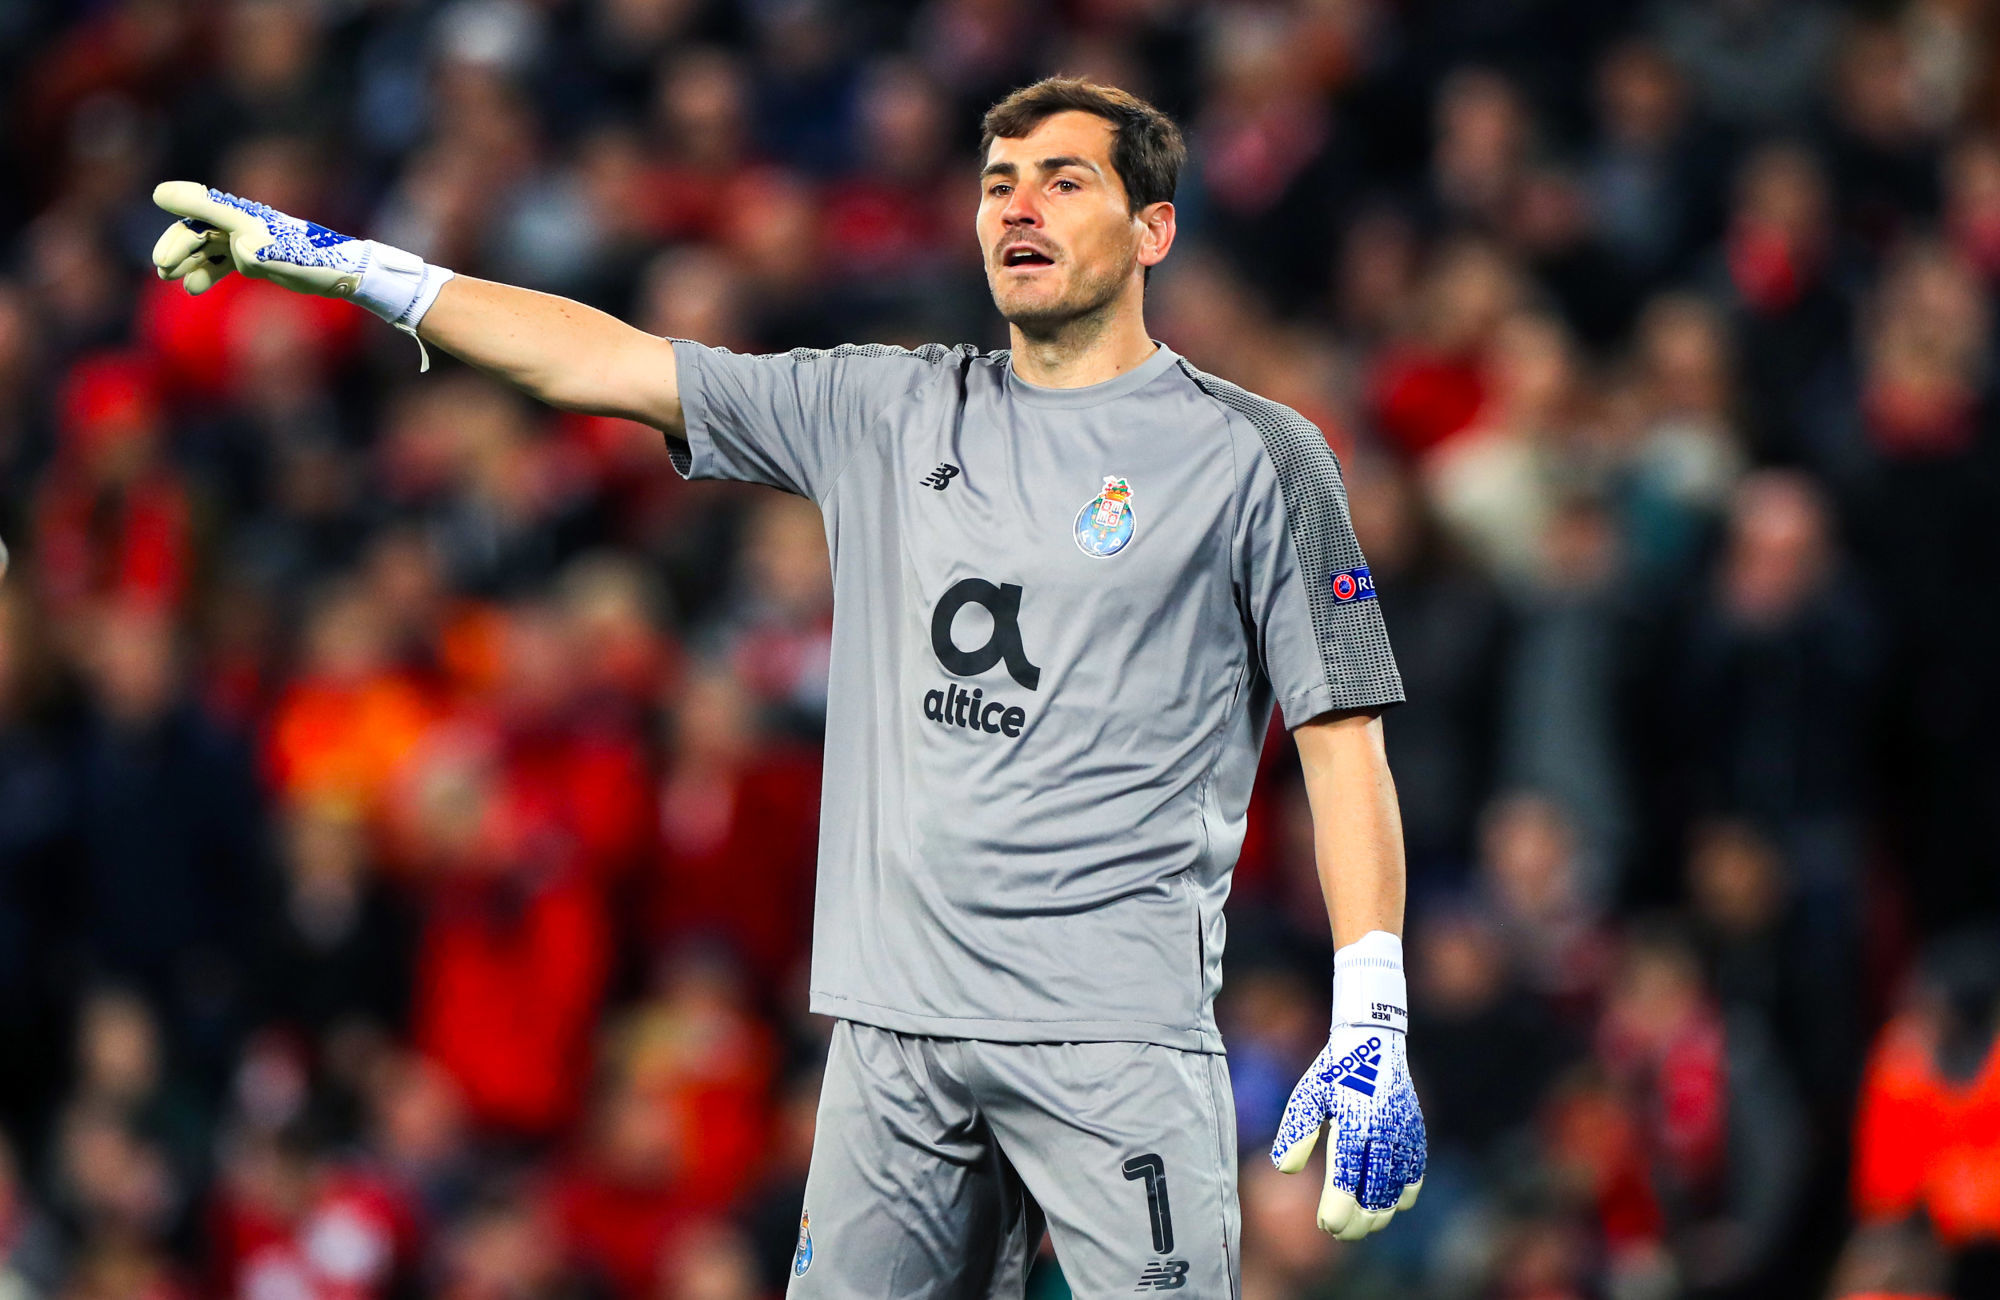 FC Porto goalkeeper Iker Casillas during the Champions League match between Liverpool and Porto on April 09th, 2019. Photo : PA Images / Icon Sport